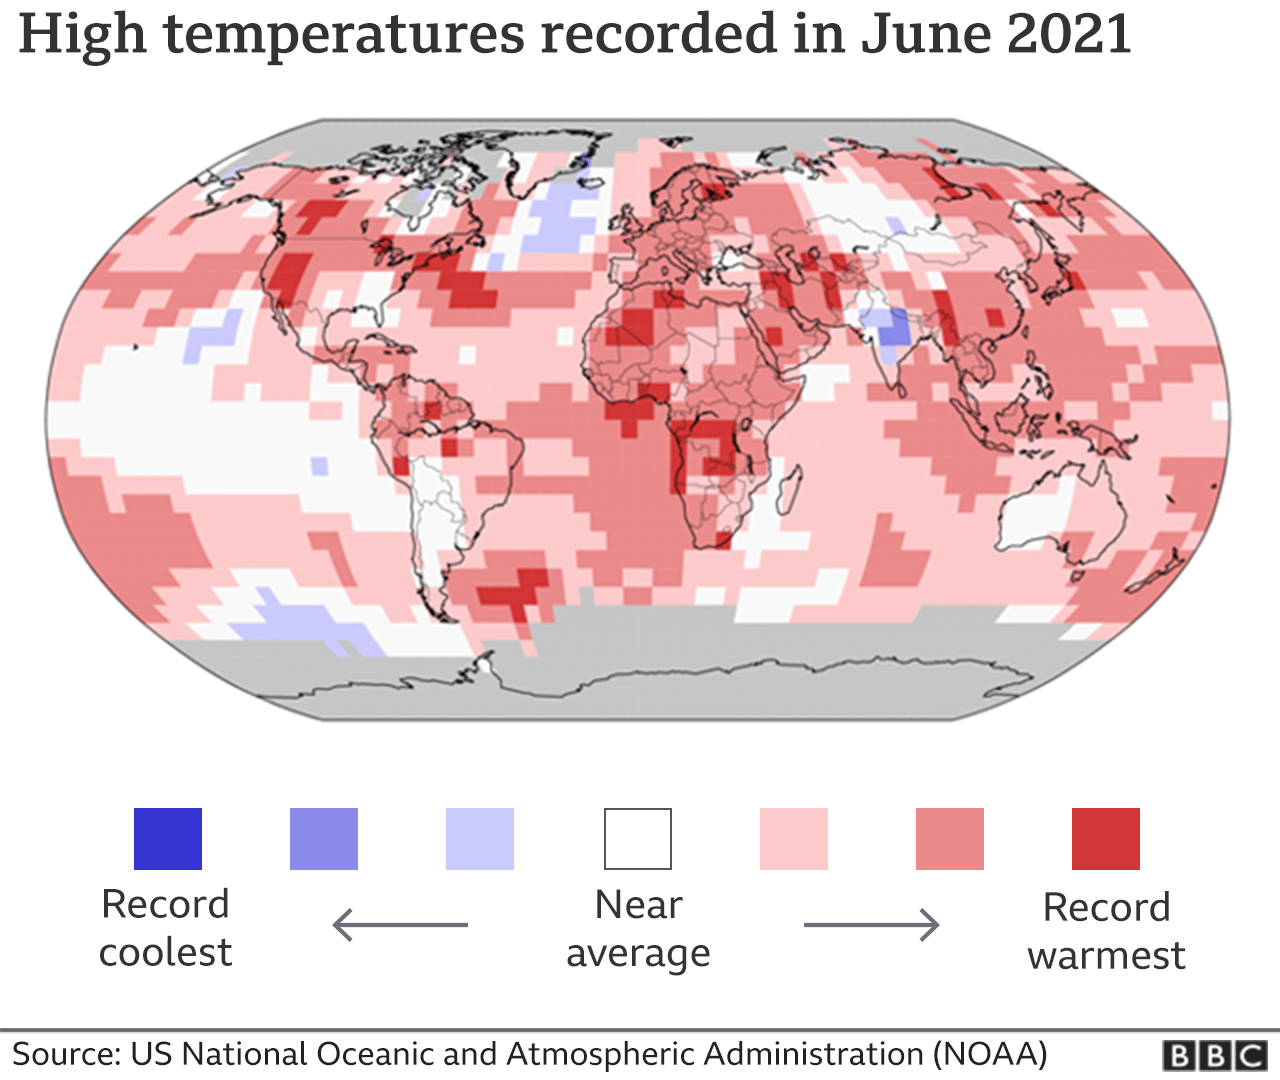 A map of the world showing where record temperatures, or close to record temperatures were set during June 2021